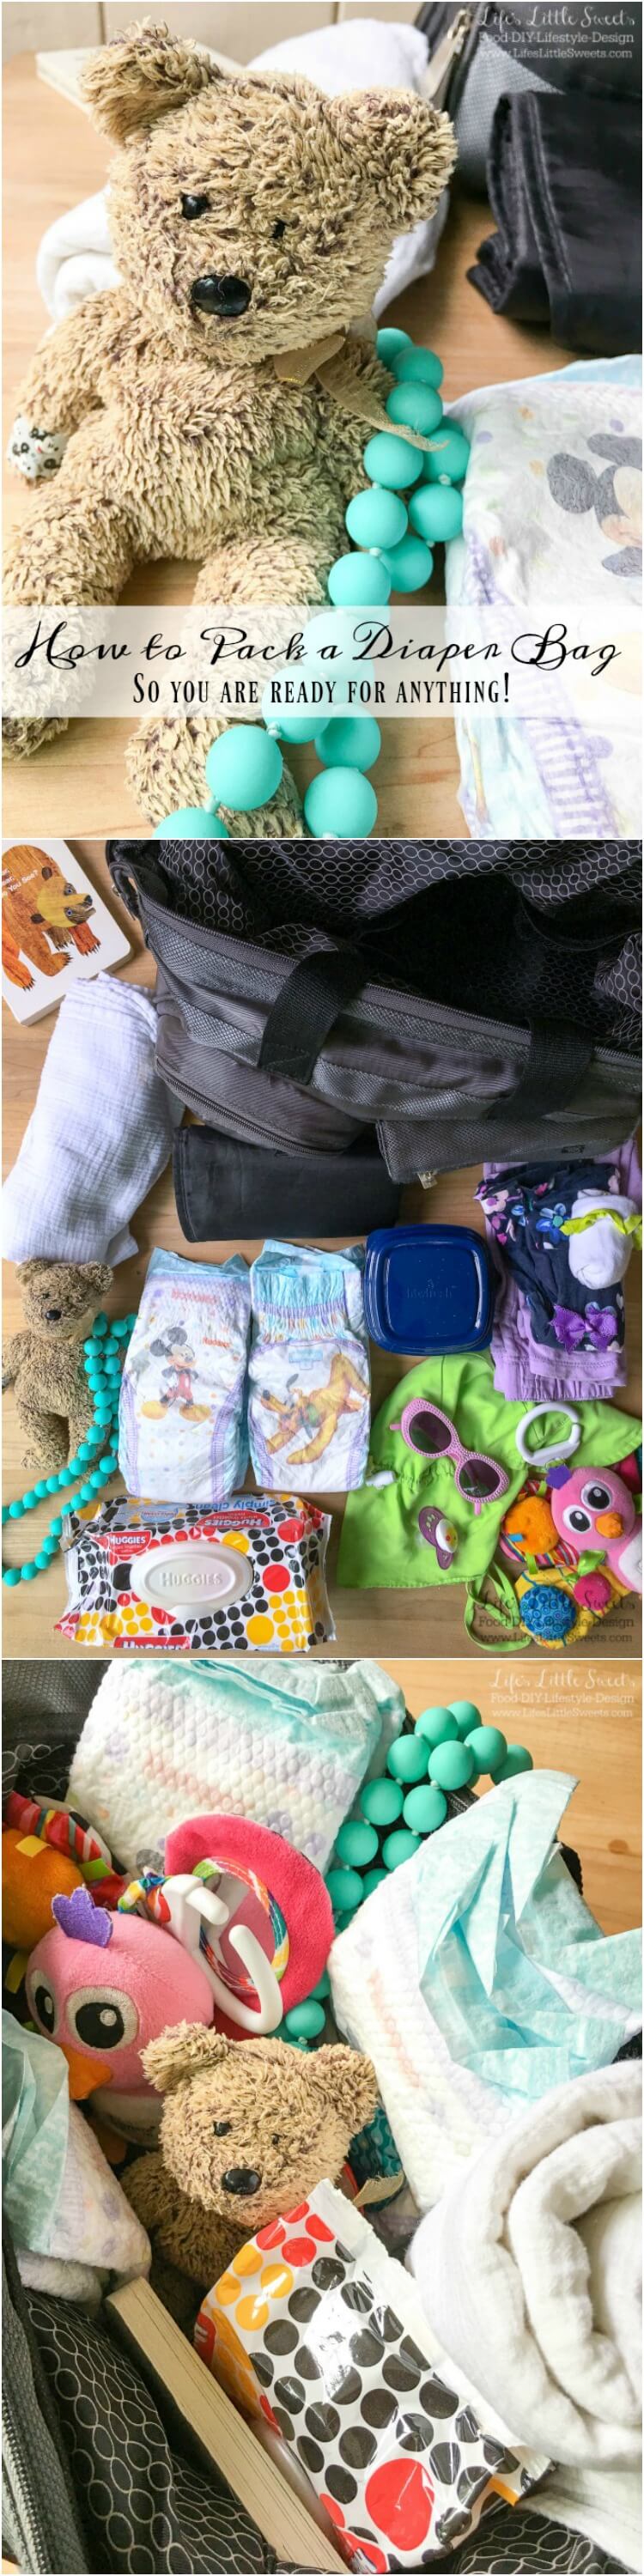 ??? Do you know How to Pack a Diaper Bag so that you are ready for anything? I have helpful tips and share what I pack, including Huggies Little Movers Plus diapers! #ad #SuperAbsorbent #CollectiveBias @Costco